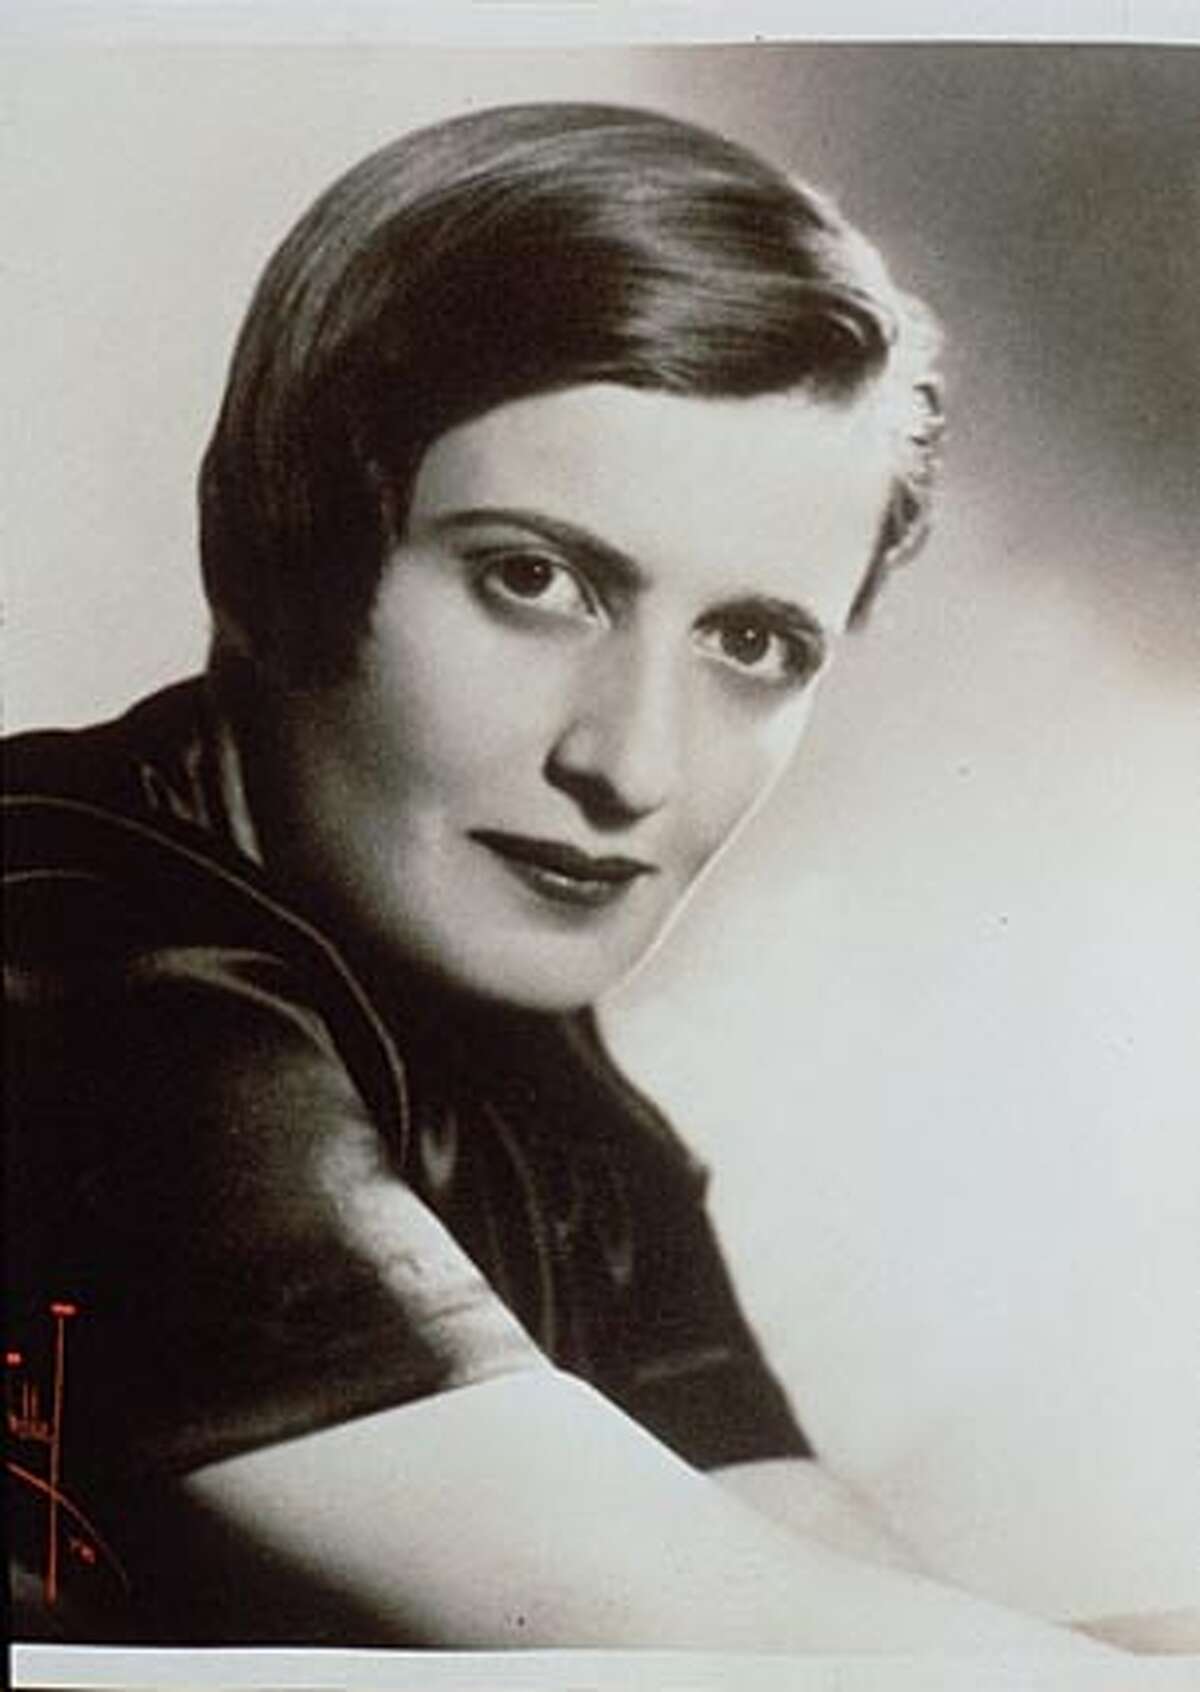 FRI MOVIES 5/C/28APR98/DD/HO--AYN RAND Film documentary of her life entitled: "AYN RAND: A SENSE OF LIFE' Written and directed by Michael Paxton. ALSO RAN: 4/5/99 CAT